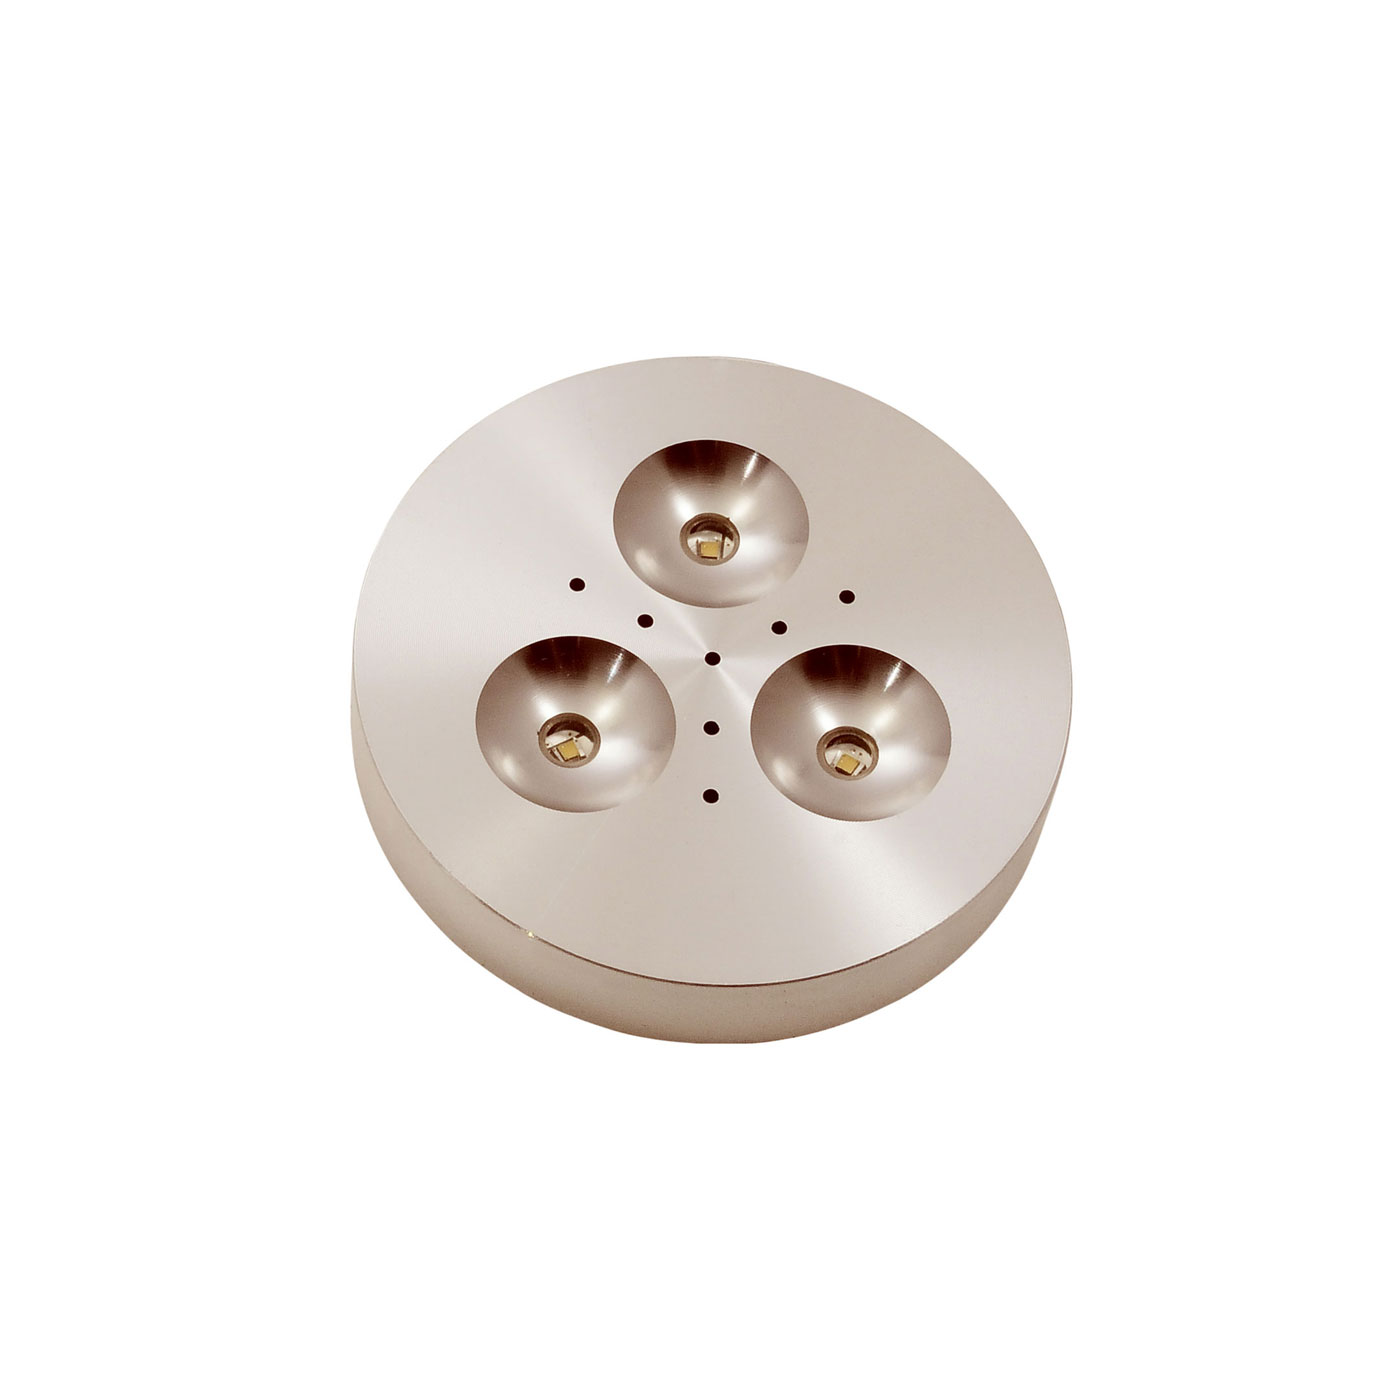 Puck Led Under Cabinet By Pureedge Lighting Puck Rd 3w